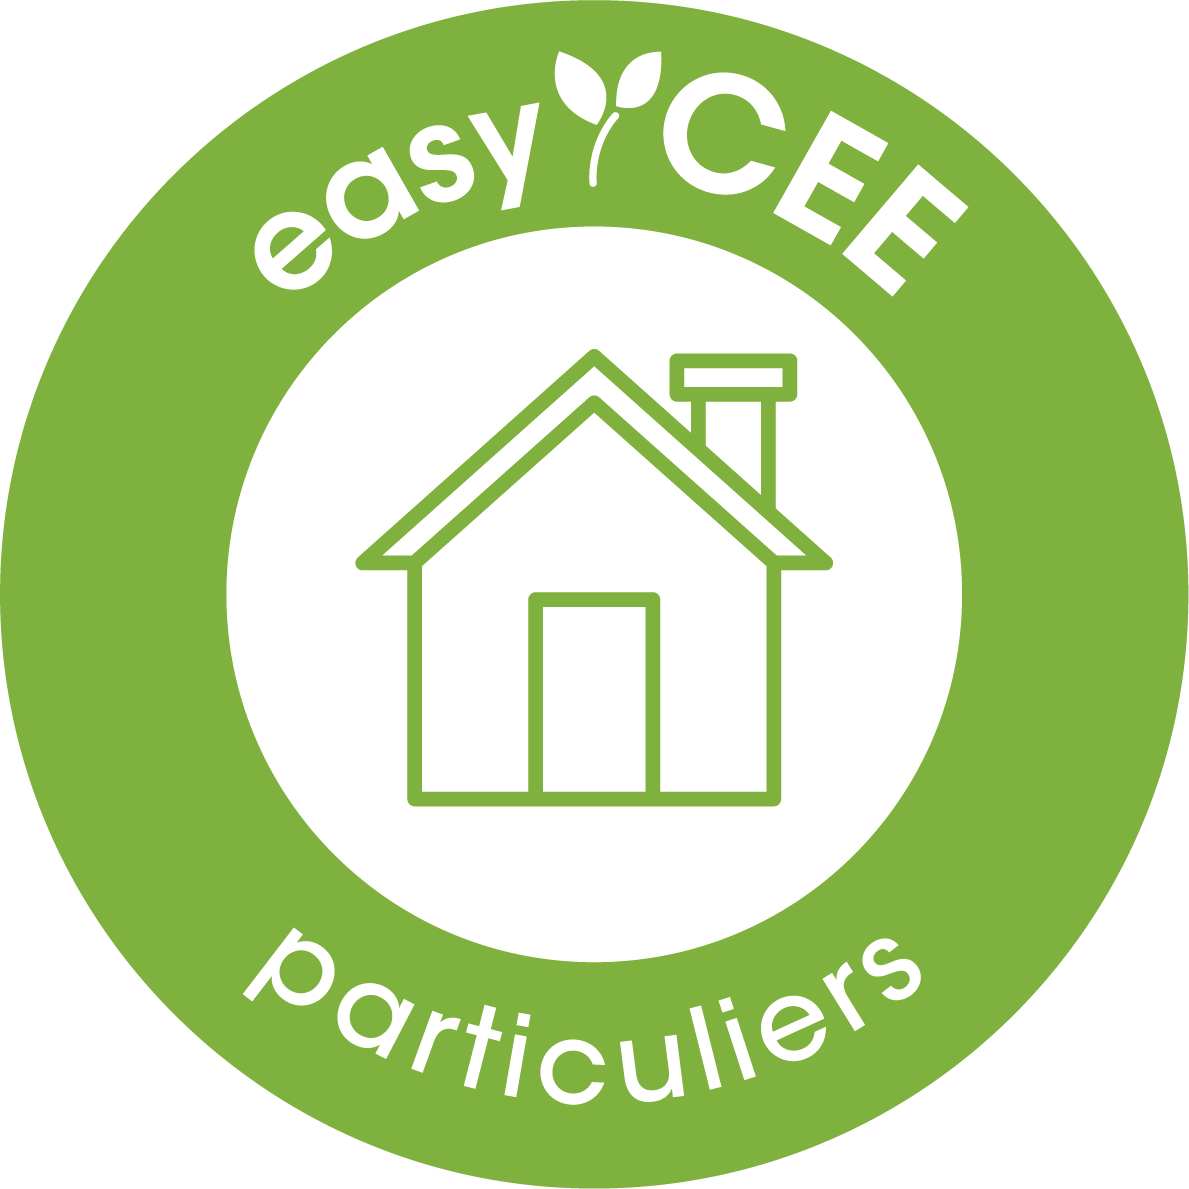 easy-cee-particulier